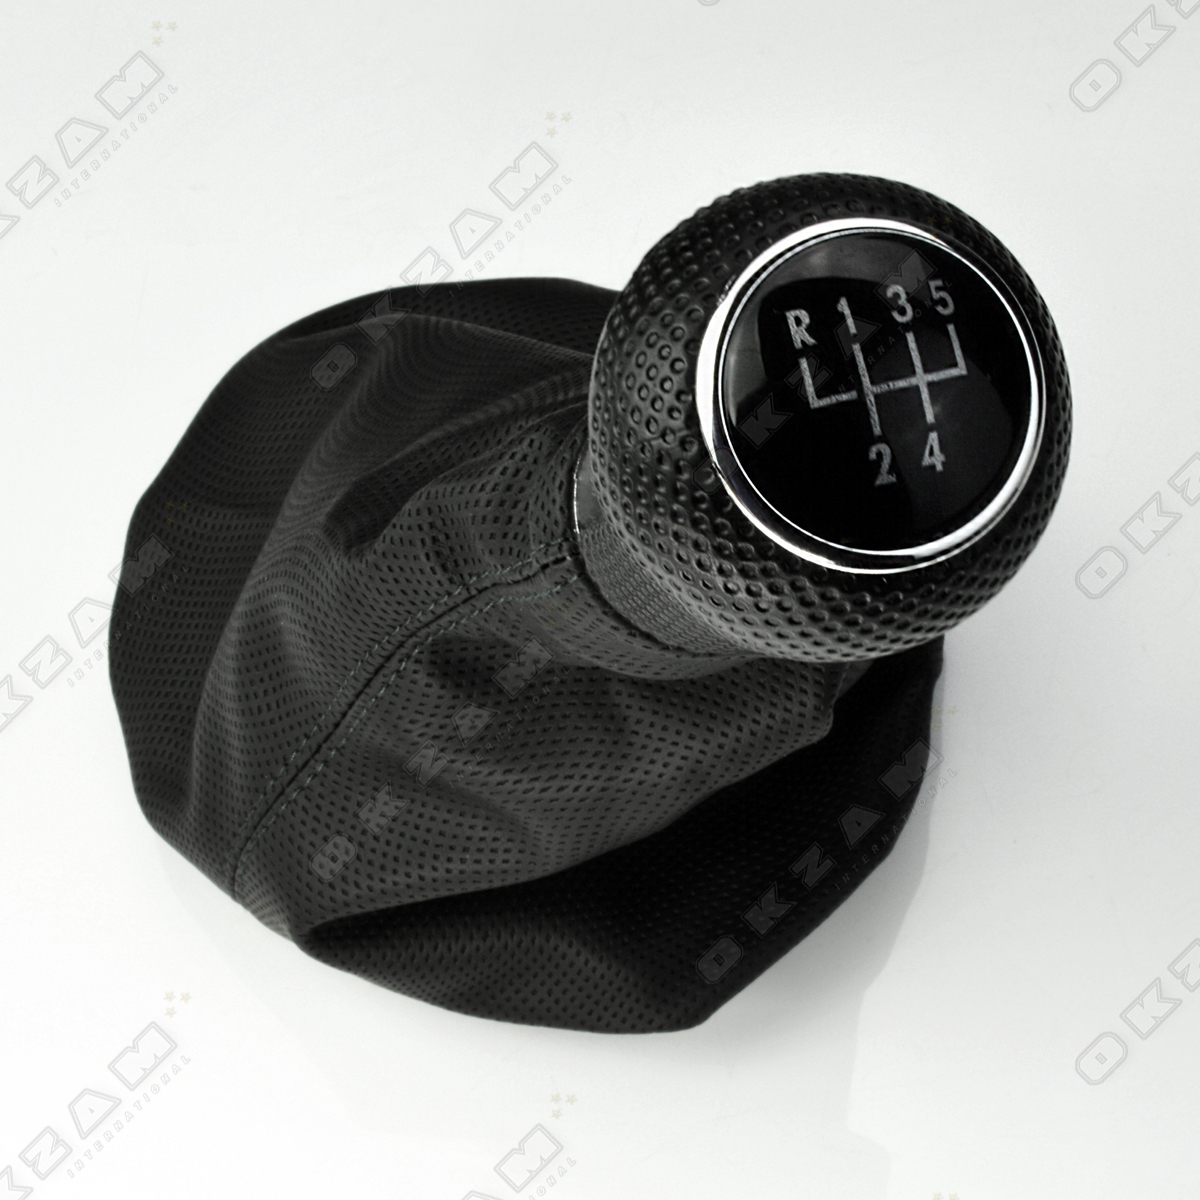 GEAR SHIFT STICK LEVER 5 SPEED FOR VW LUPO 6X1 6E1 ...